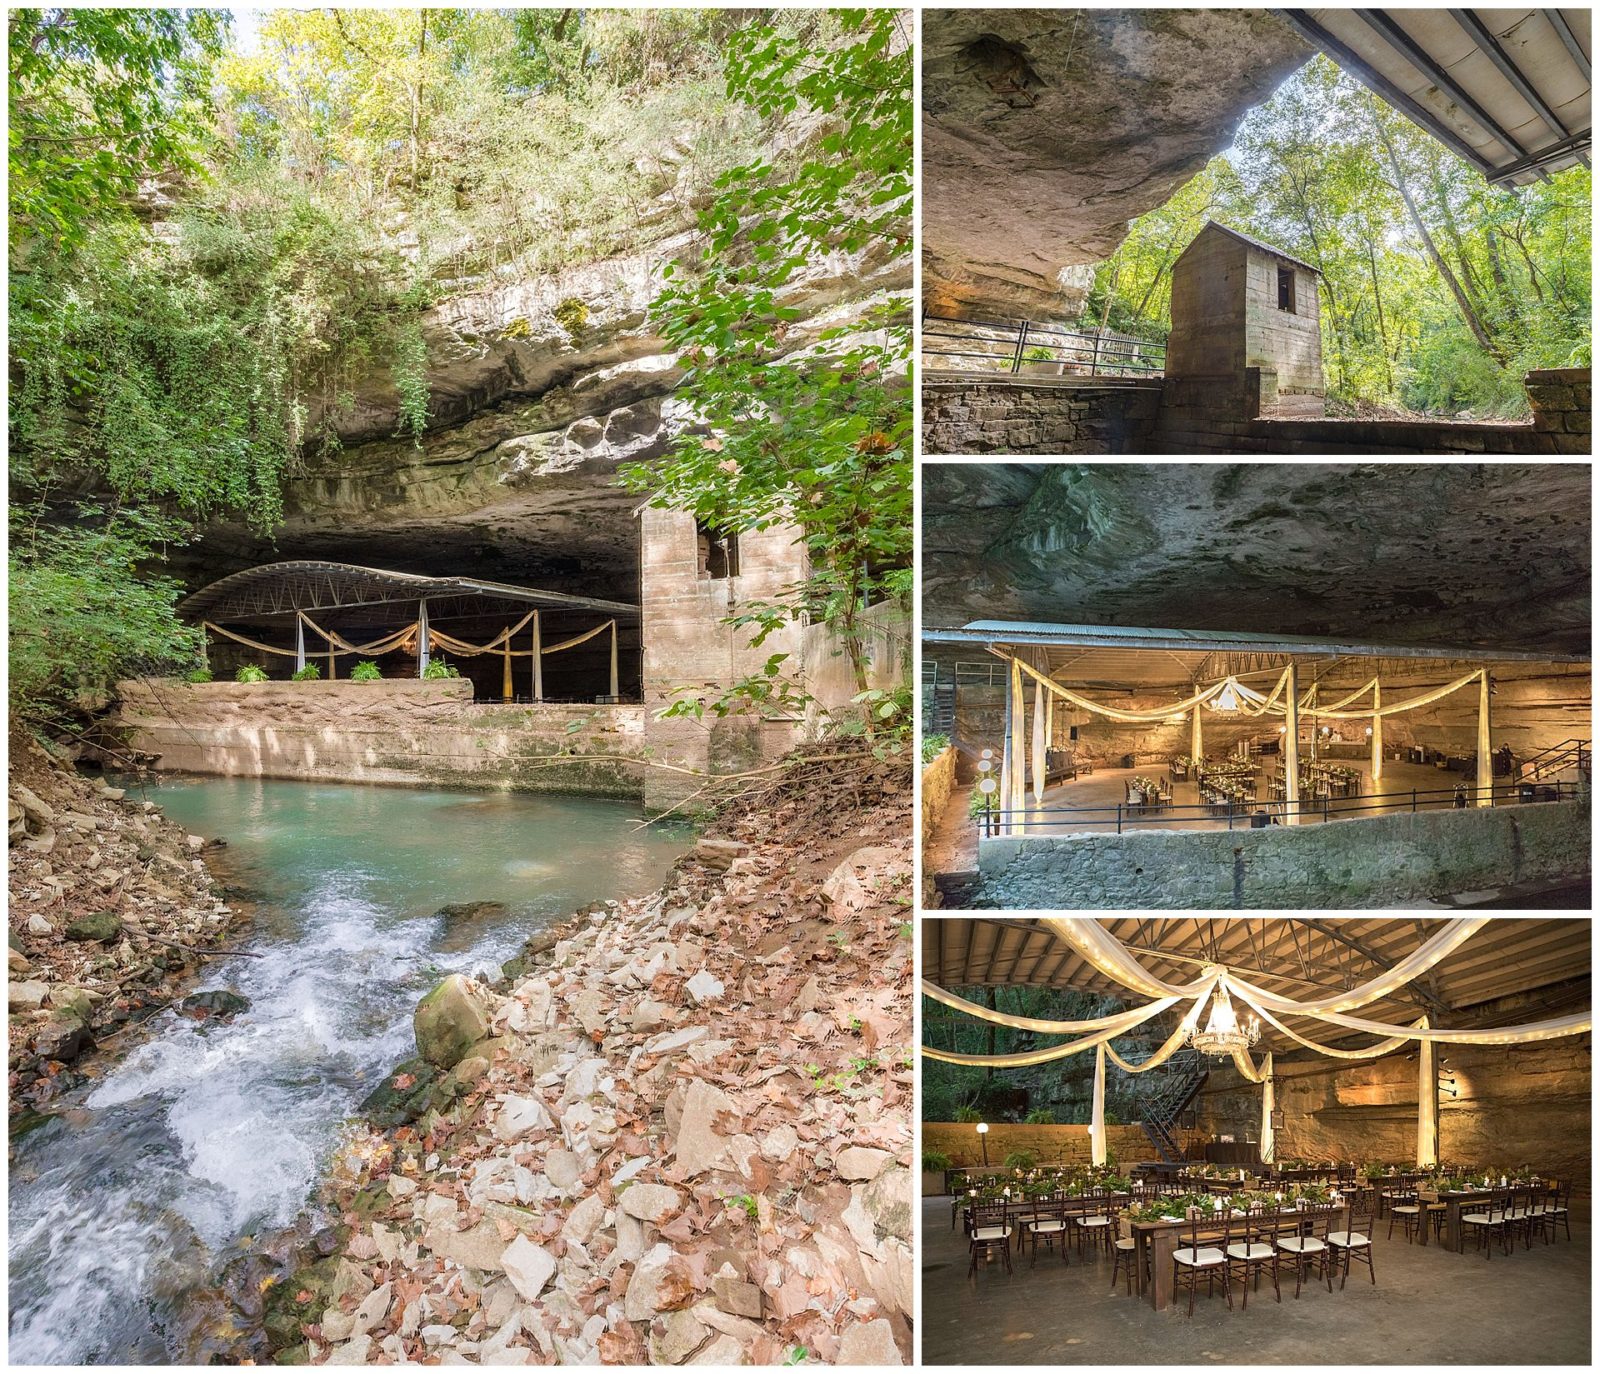 Lost River Cave a beautiful & unique outdoor wedding venue in Bowling Green, KY. Perfect destination wedding for adventurous couples who love the outdoors.